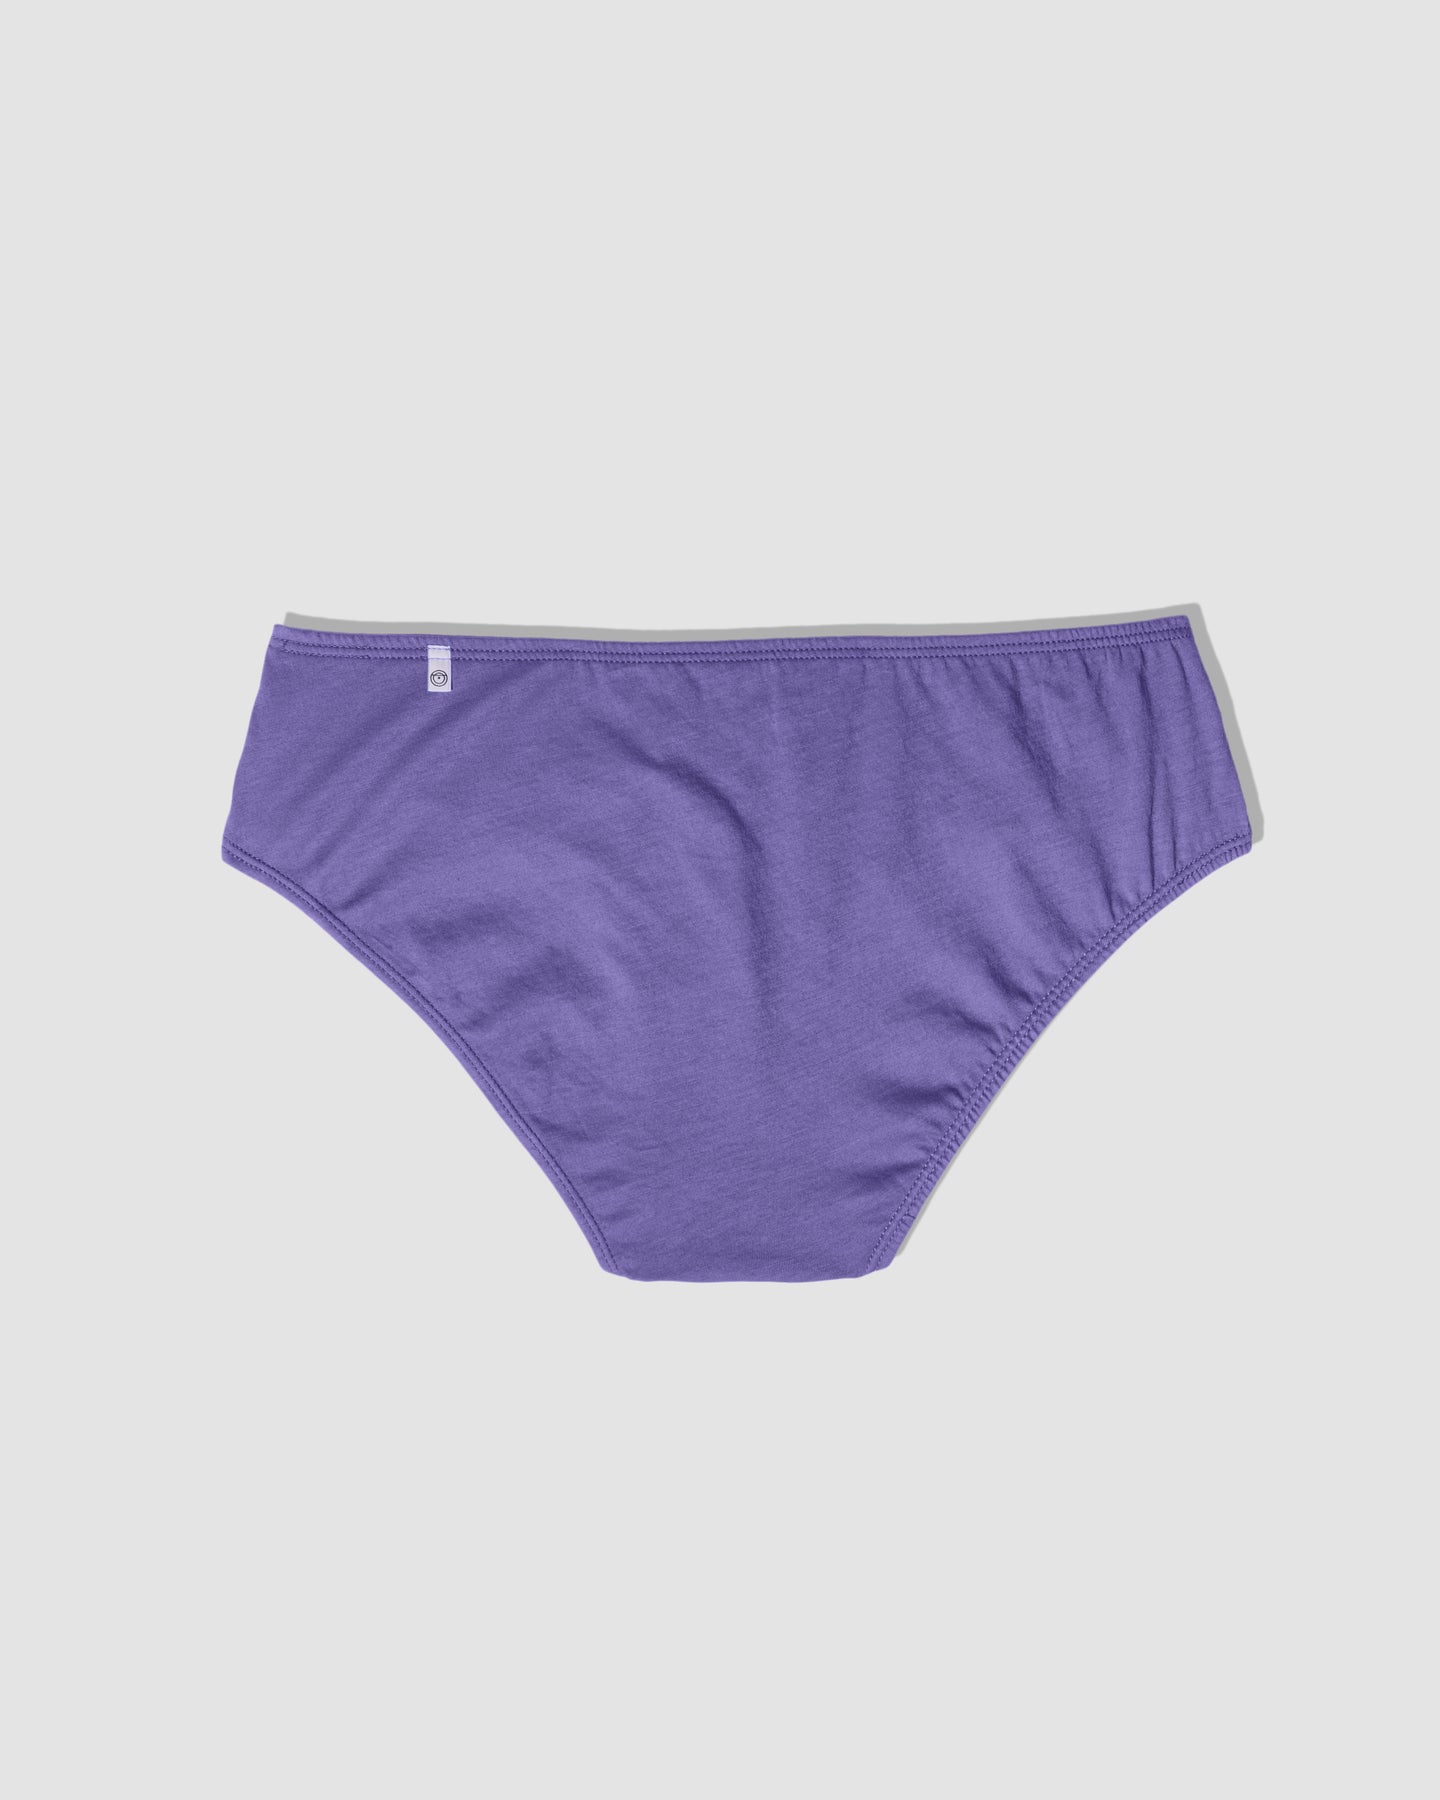 Over 40,000  shoppers call these the 'most comfortable undies